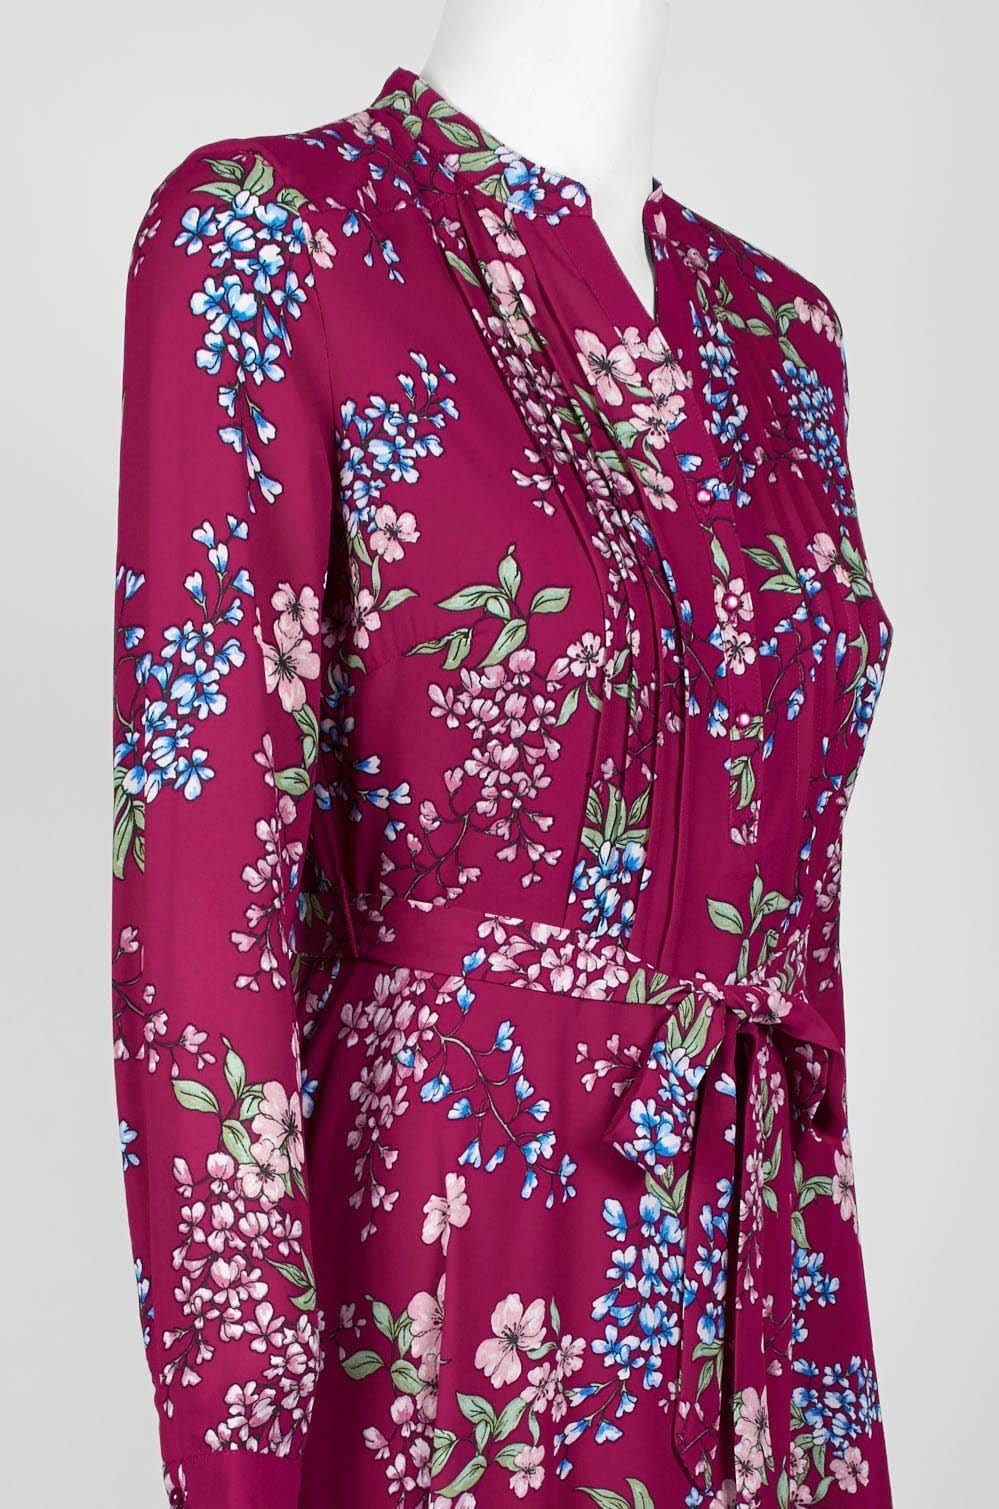 Nanette Nanette Lepore - NM9S171Y9 Long Sleeve Floral Print Dress in Pink and Multi-Color